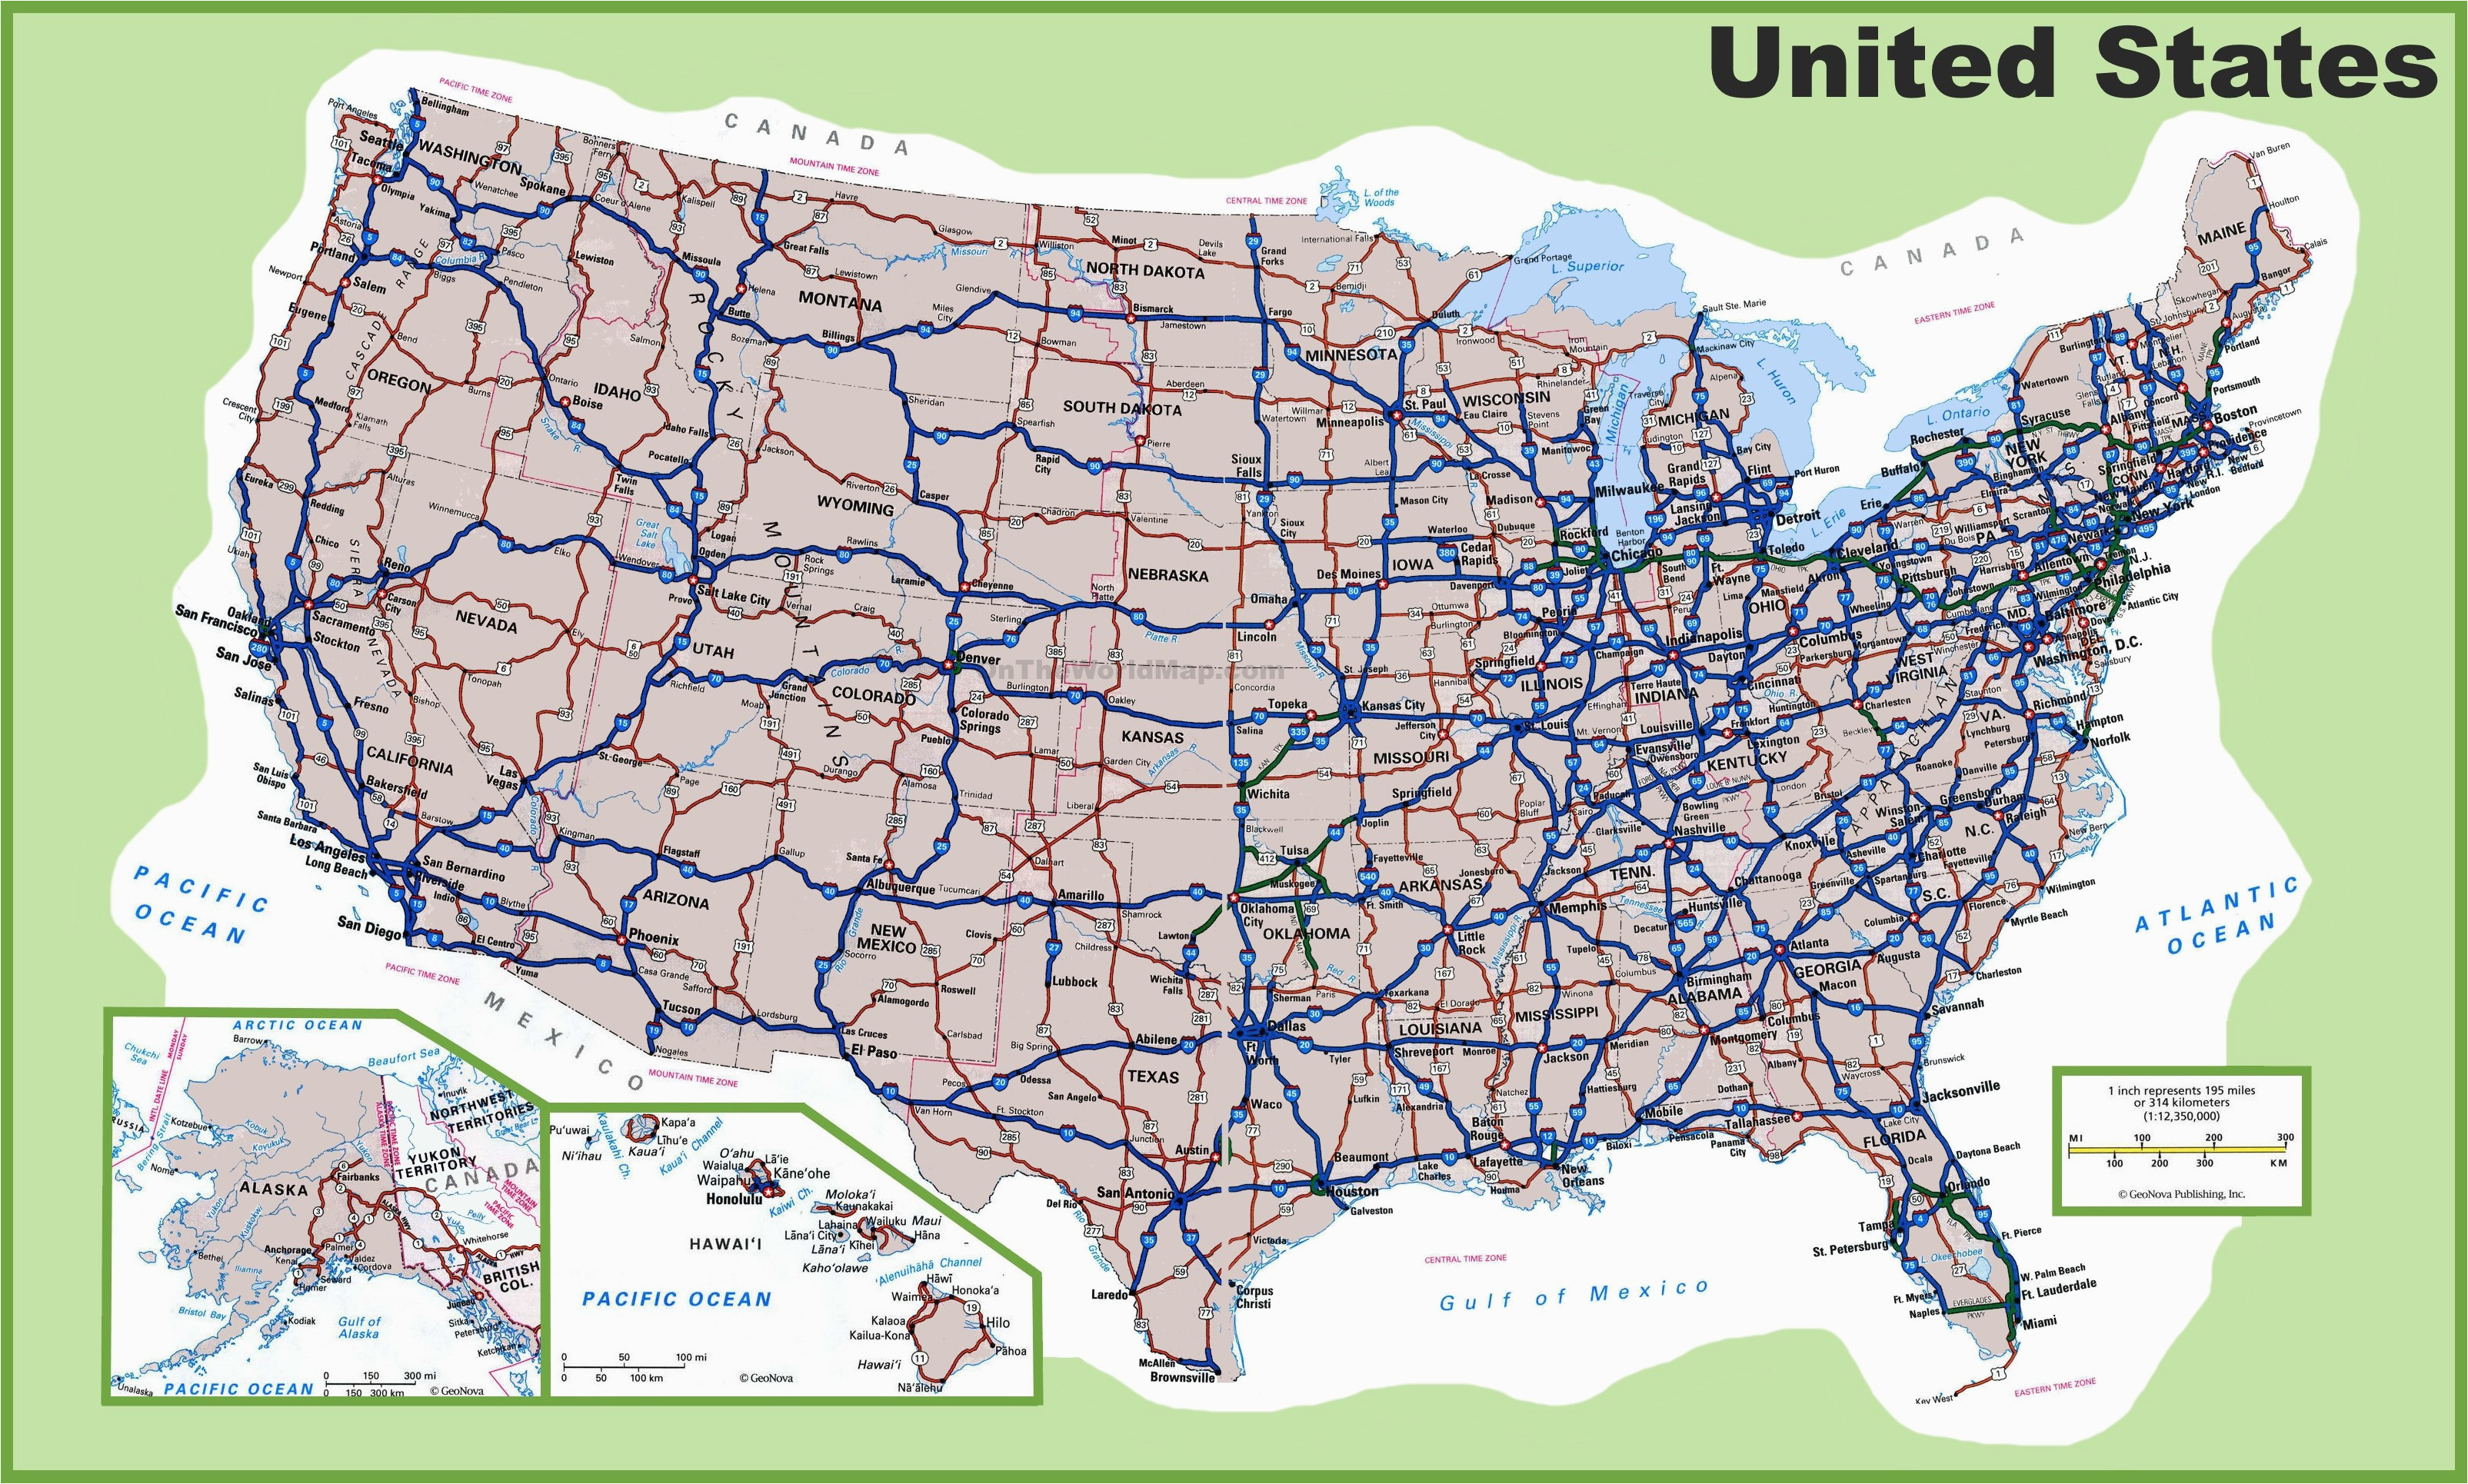 California Freeway Maps Road Maps Of United States New California Map Detailed Map southern